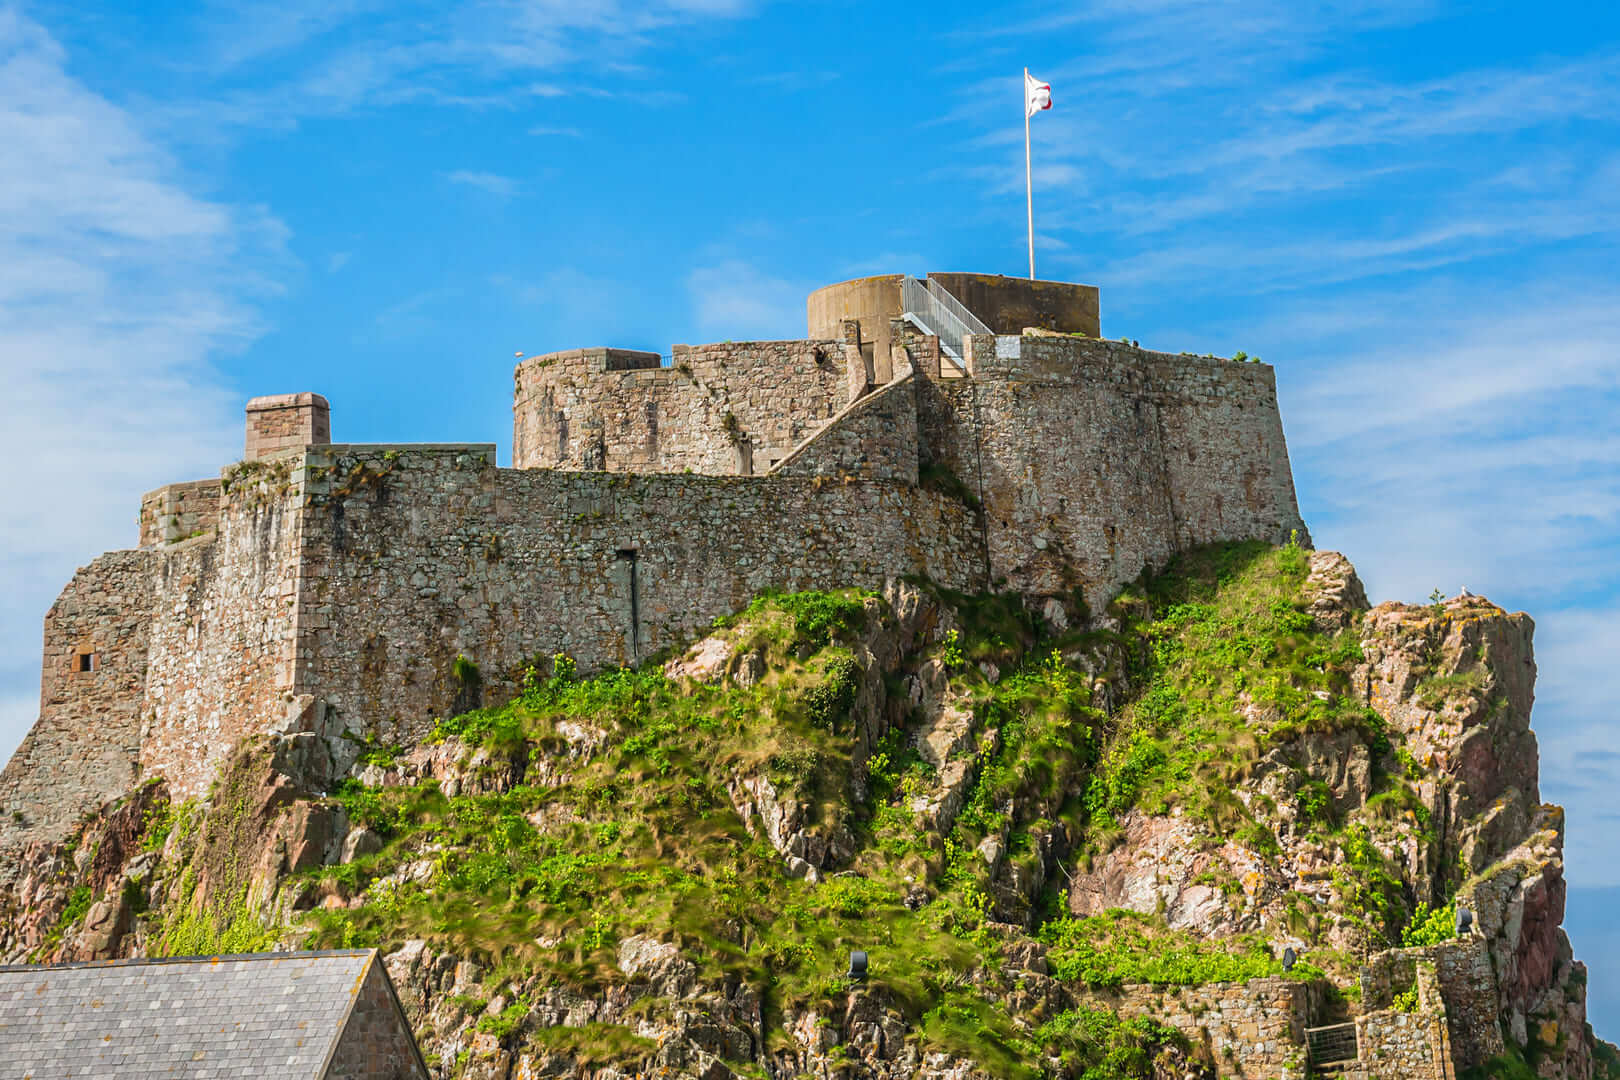 Elizabeth Castle (1594) - castle and tourist attraction on a tidal island within parish of Saint Helier, Jersey, UK.
